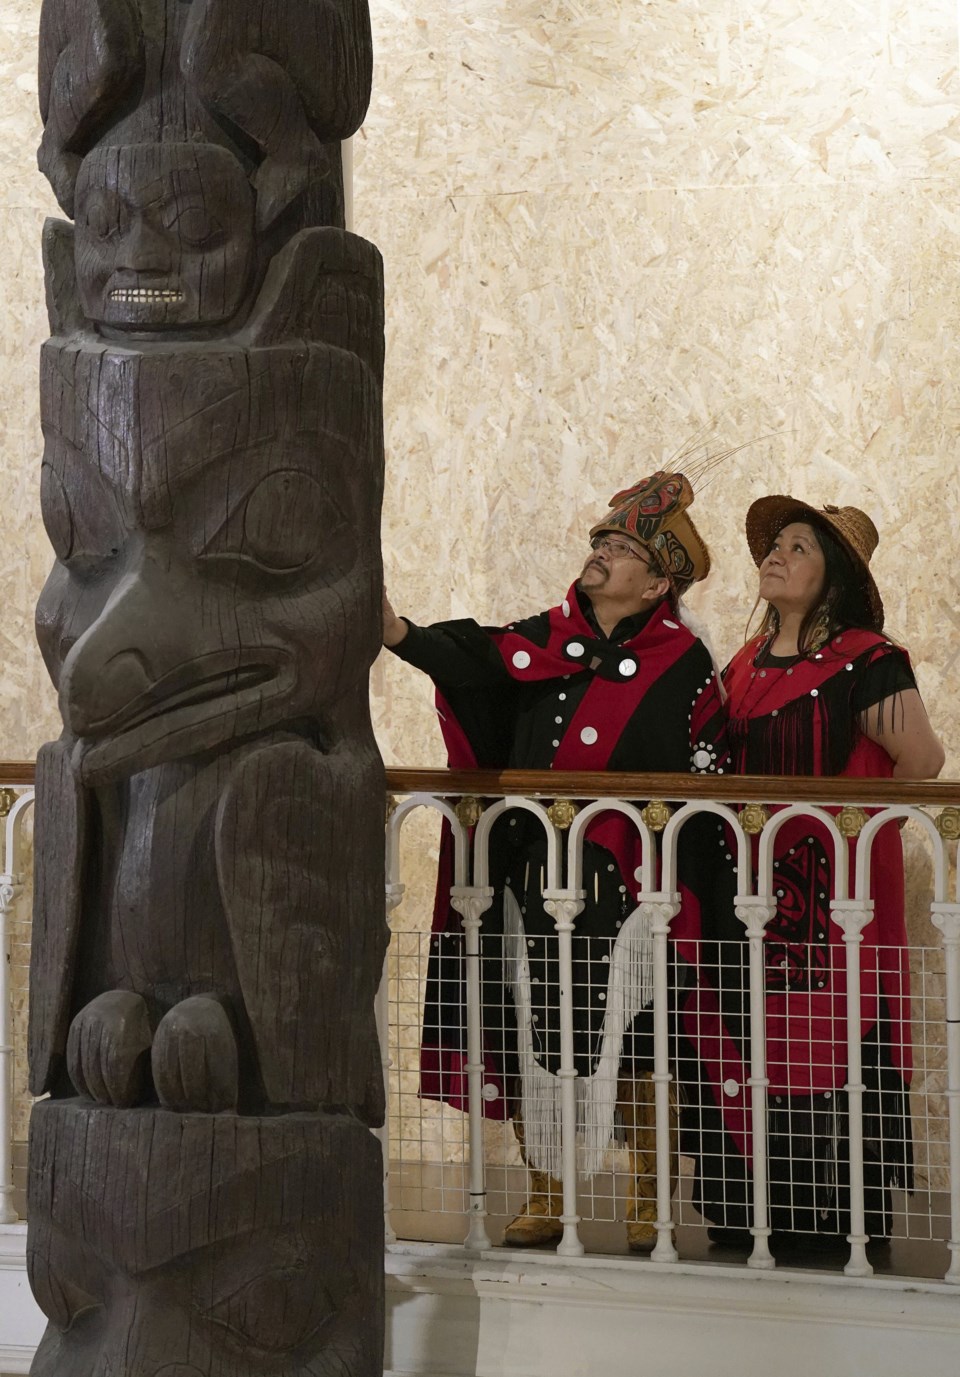 Ceremony marks start of journey home for Indigenous totem pole taken to ...